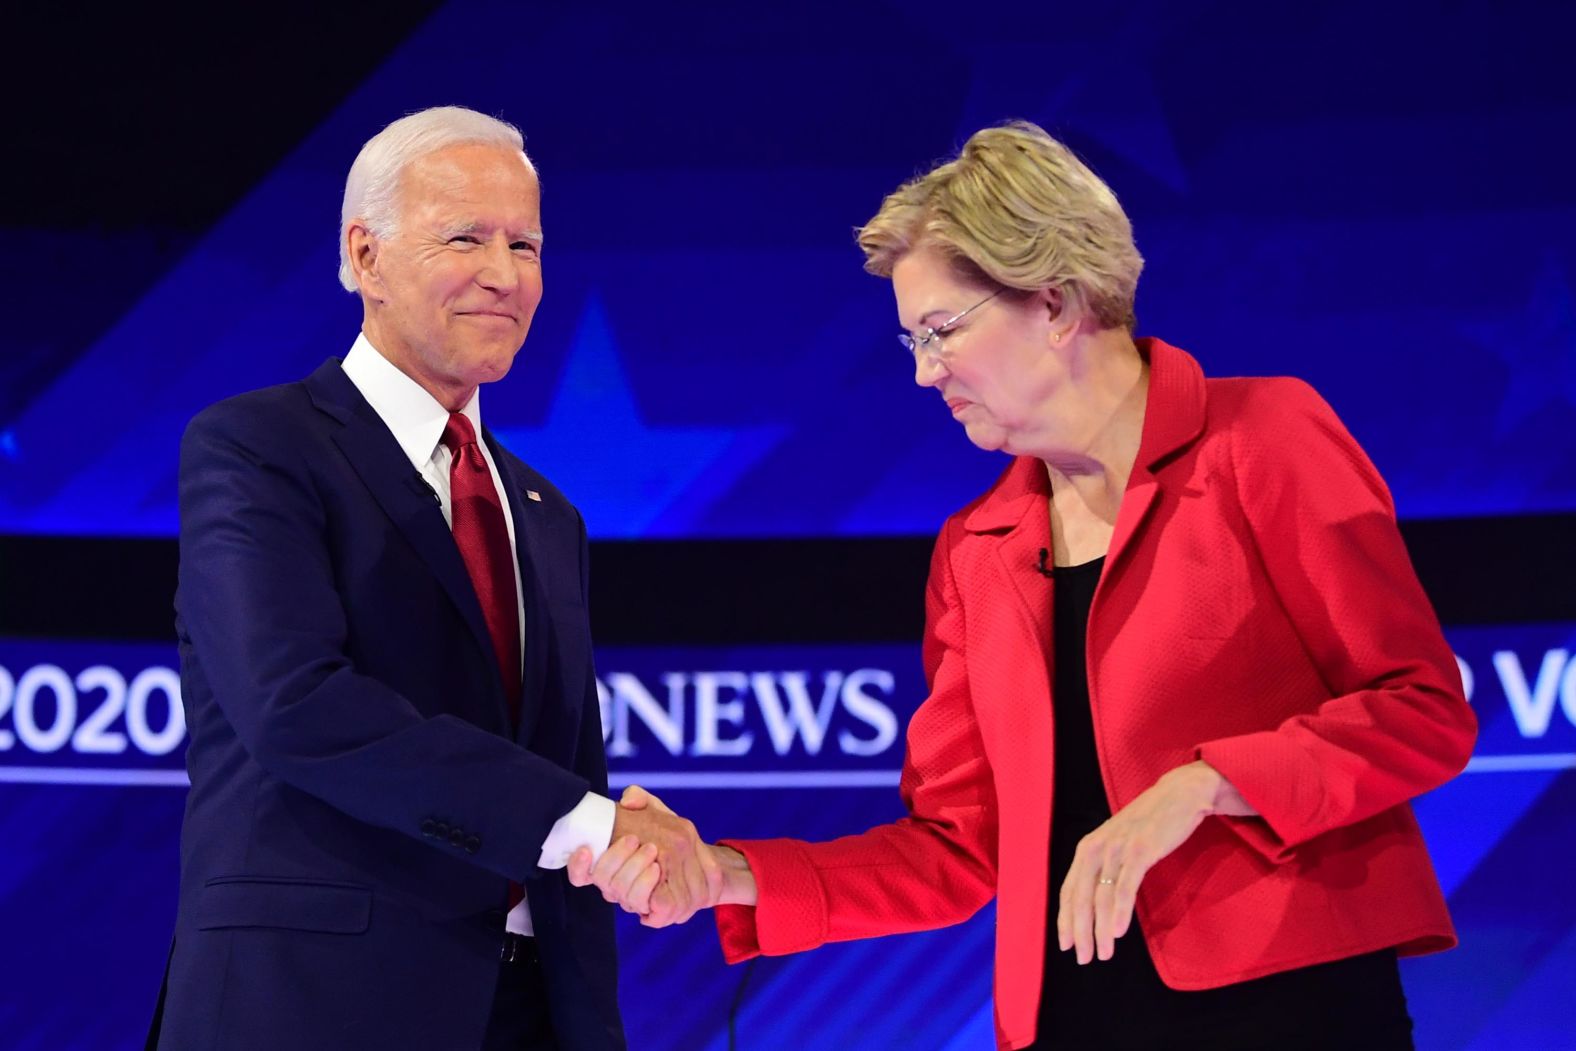 Biden and Warren shake hands as they arrive on stage.